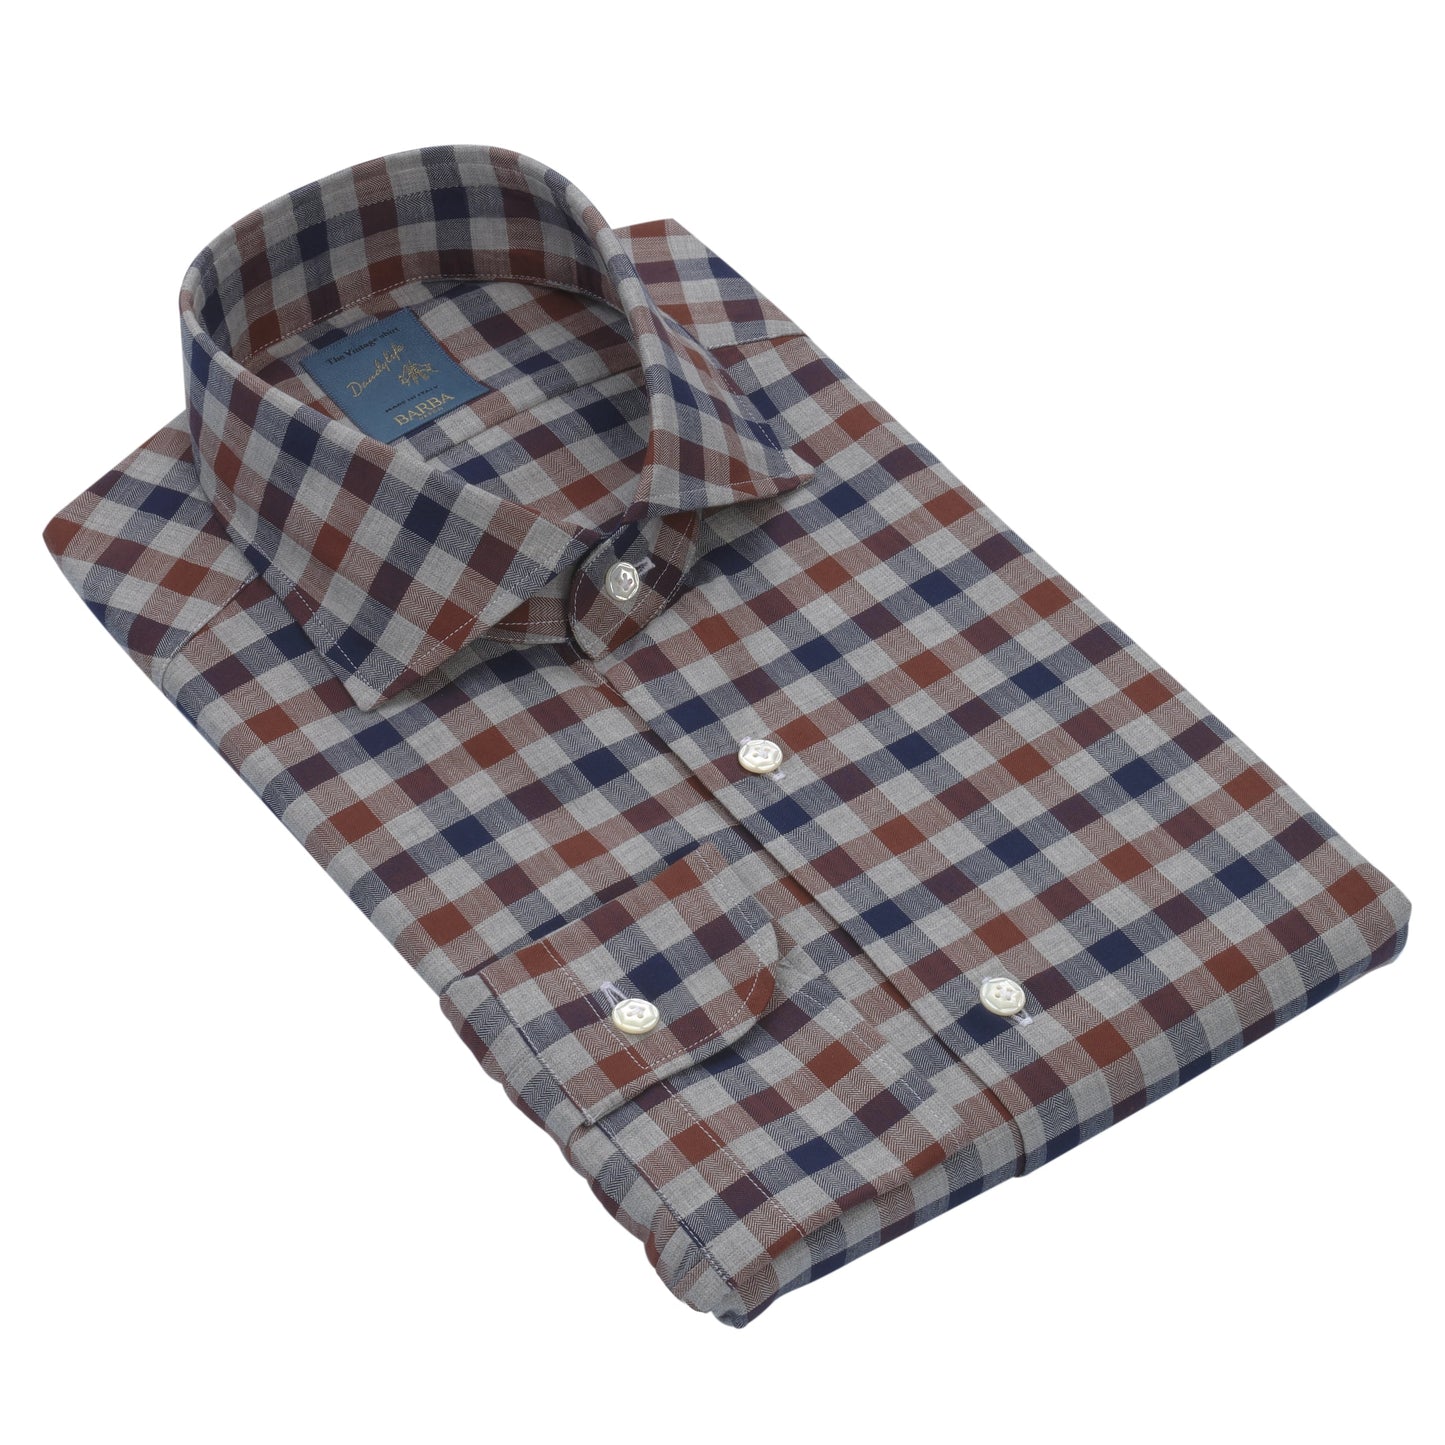 Barba Napoli "Dandy Life" Gingham - Check Cotton Shirt in Blue, Brown and Grey - SARTALE